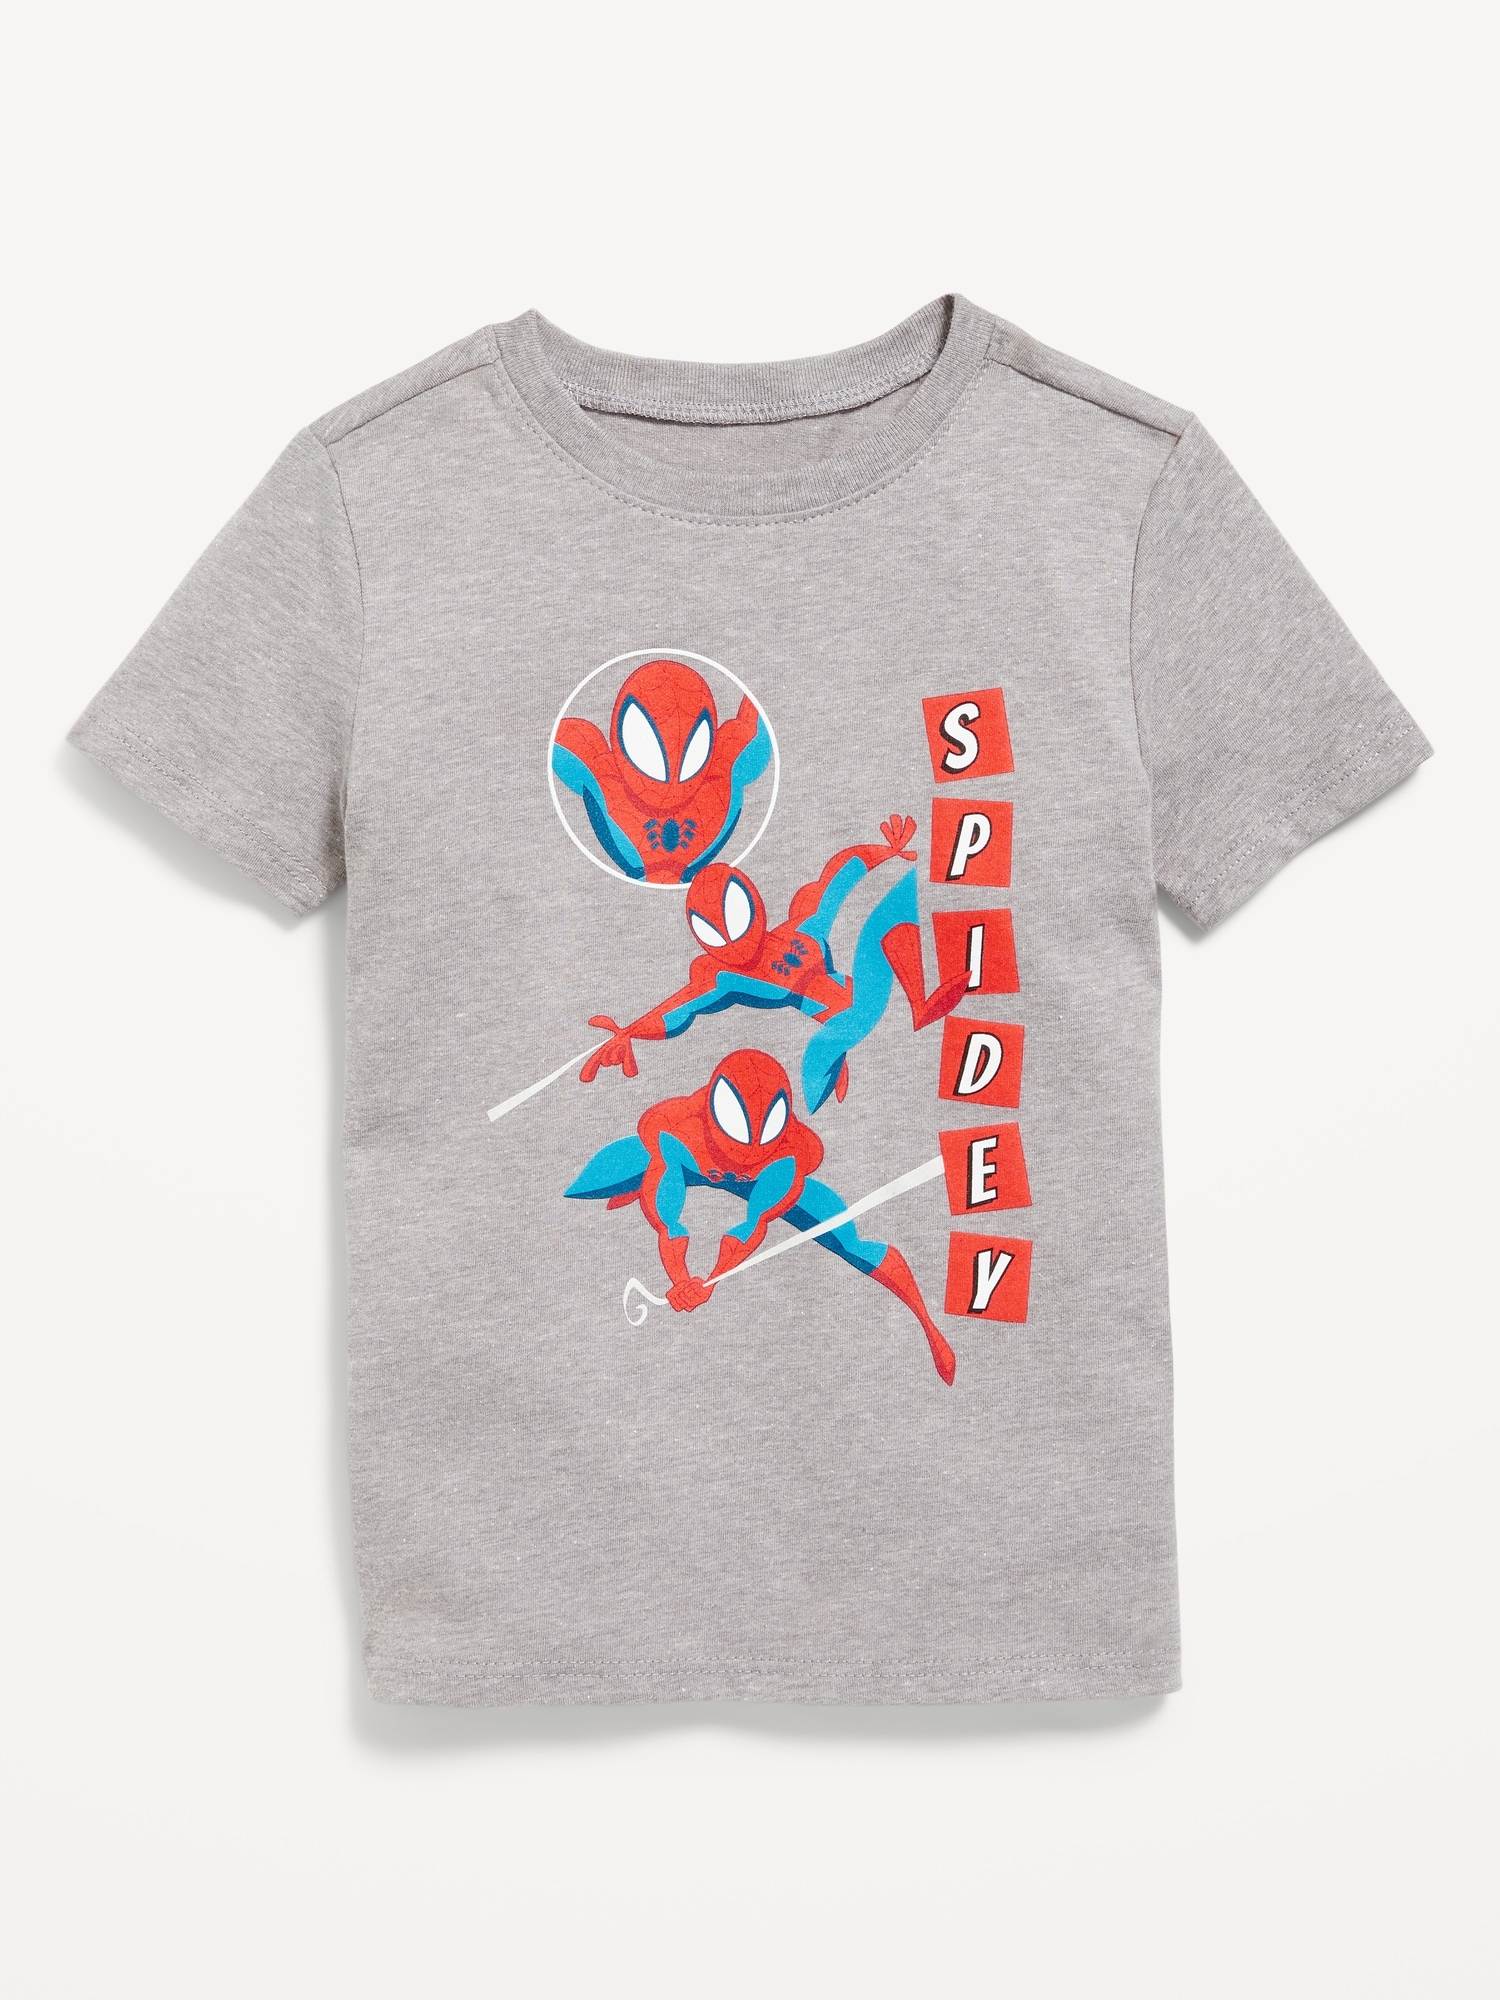 Spider-Man Blue Other Clothing for Boys Sizes (4+)